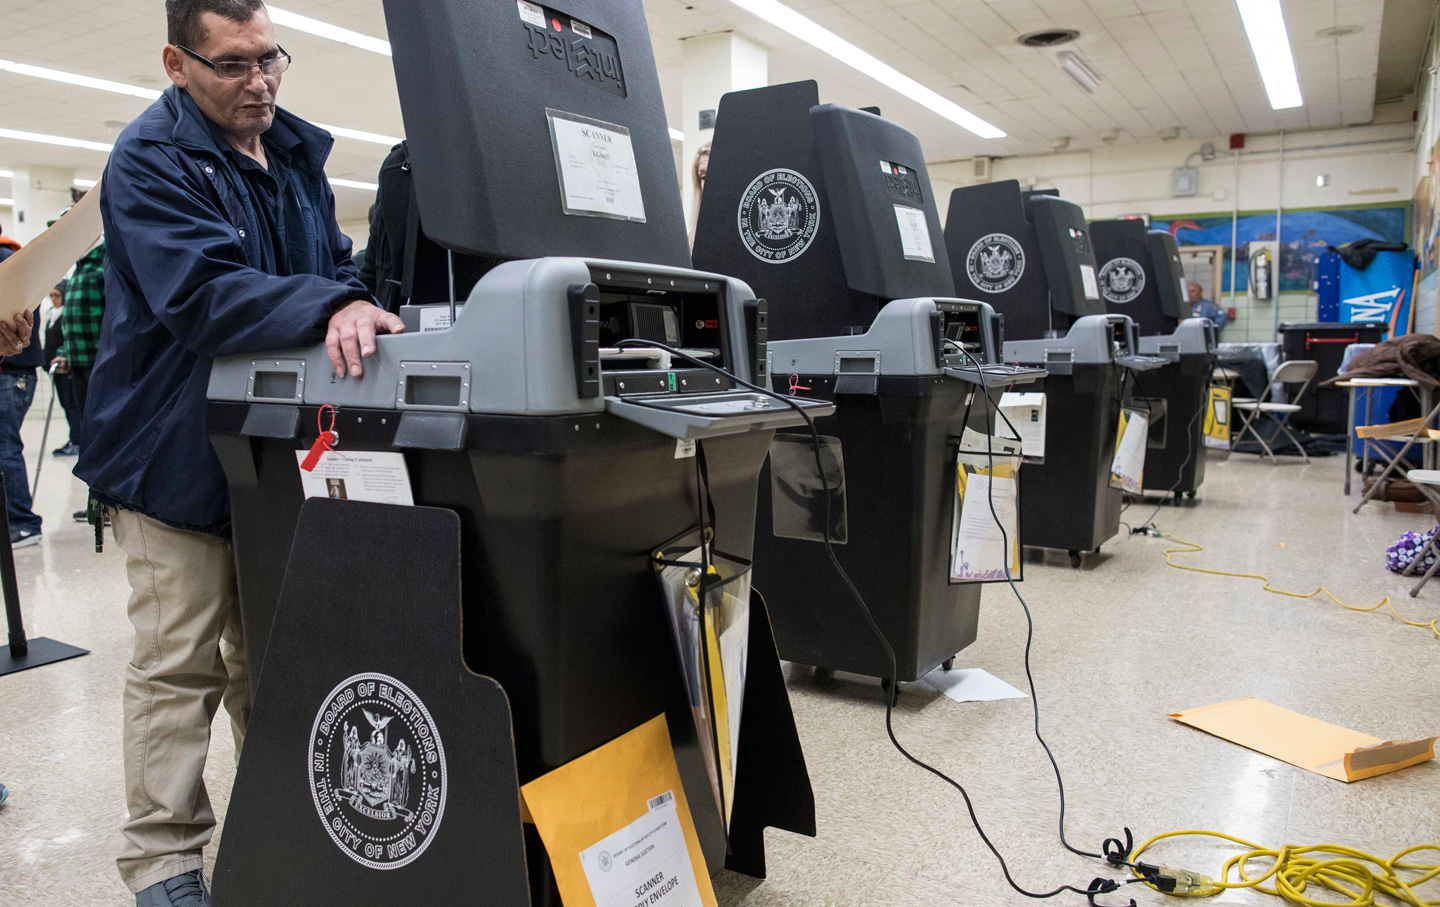 Worried That Voting Machines Could Be Hacked? There’s a Bill to Prevent That.